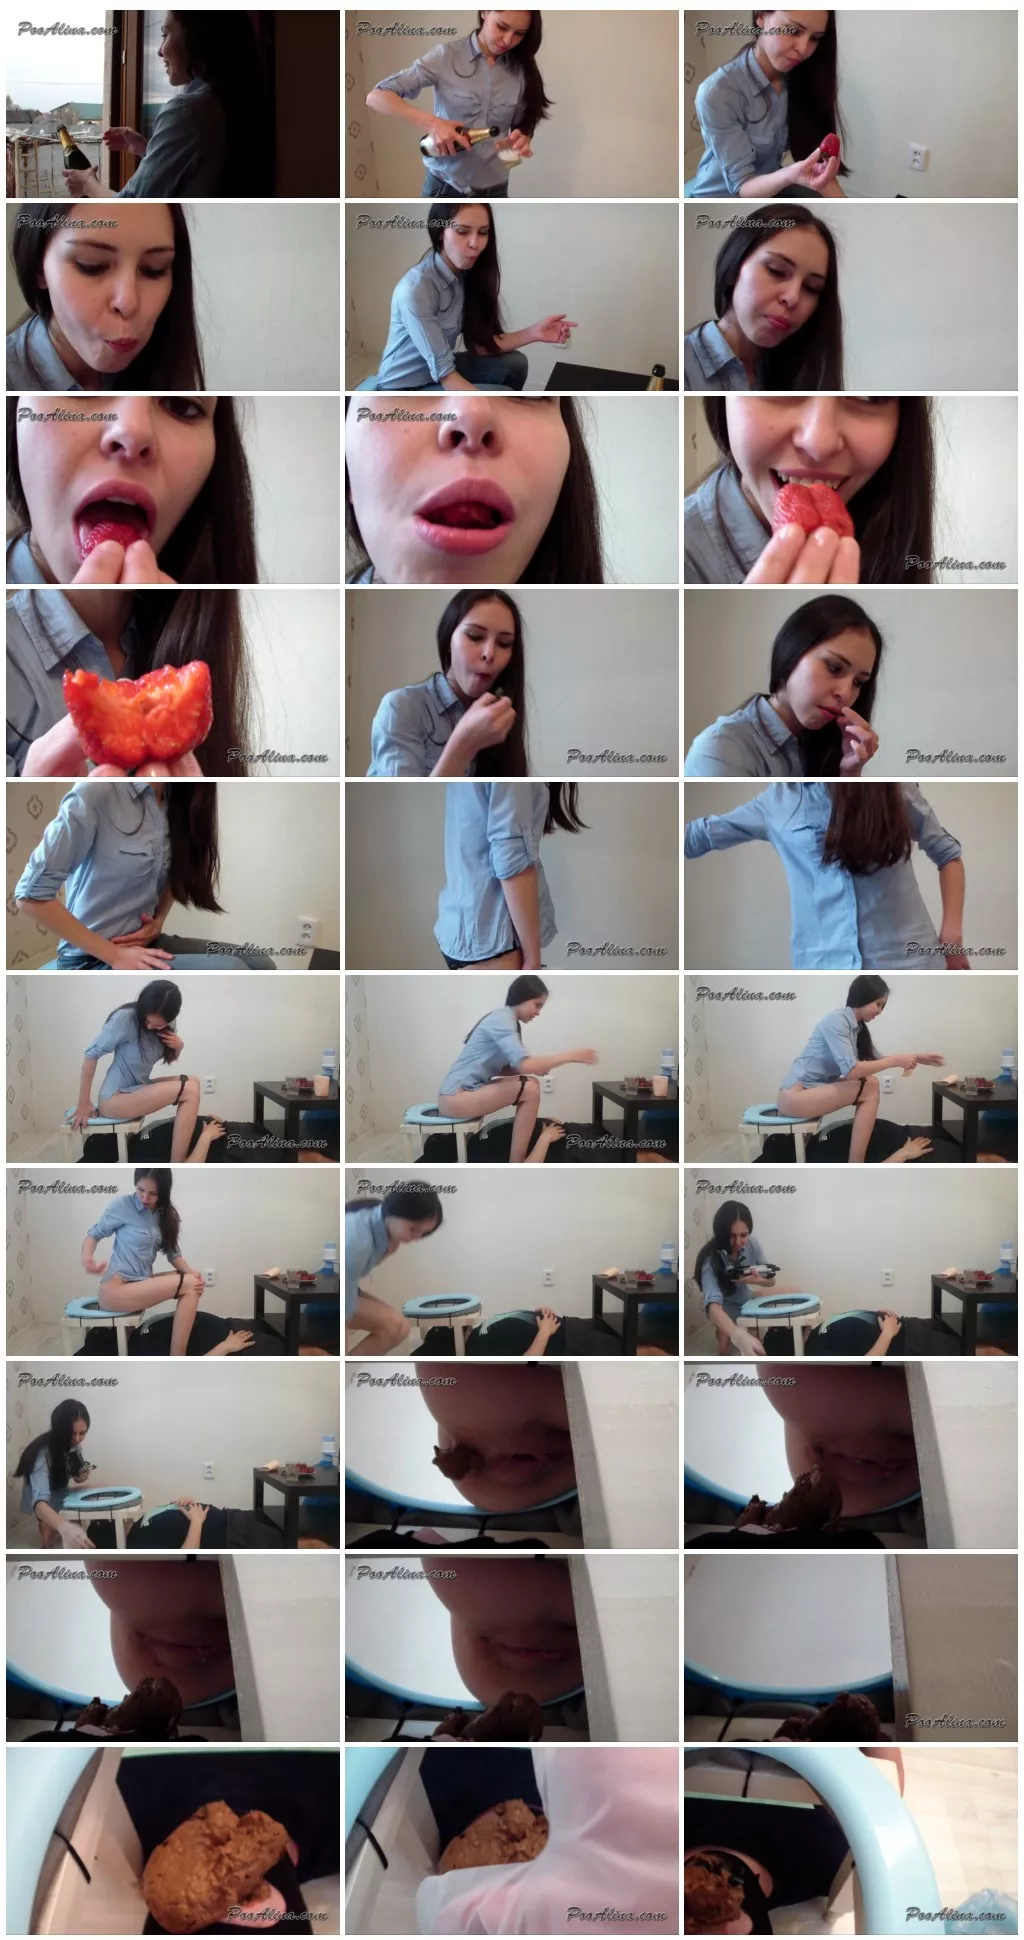 Alina eats strawberries and pooping in mouth toilet slave [Scat, pissing, shit,  Femdom ,Toilet Slavery,Domination, Eat shit]